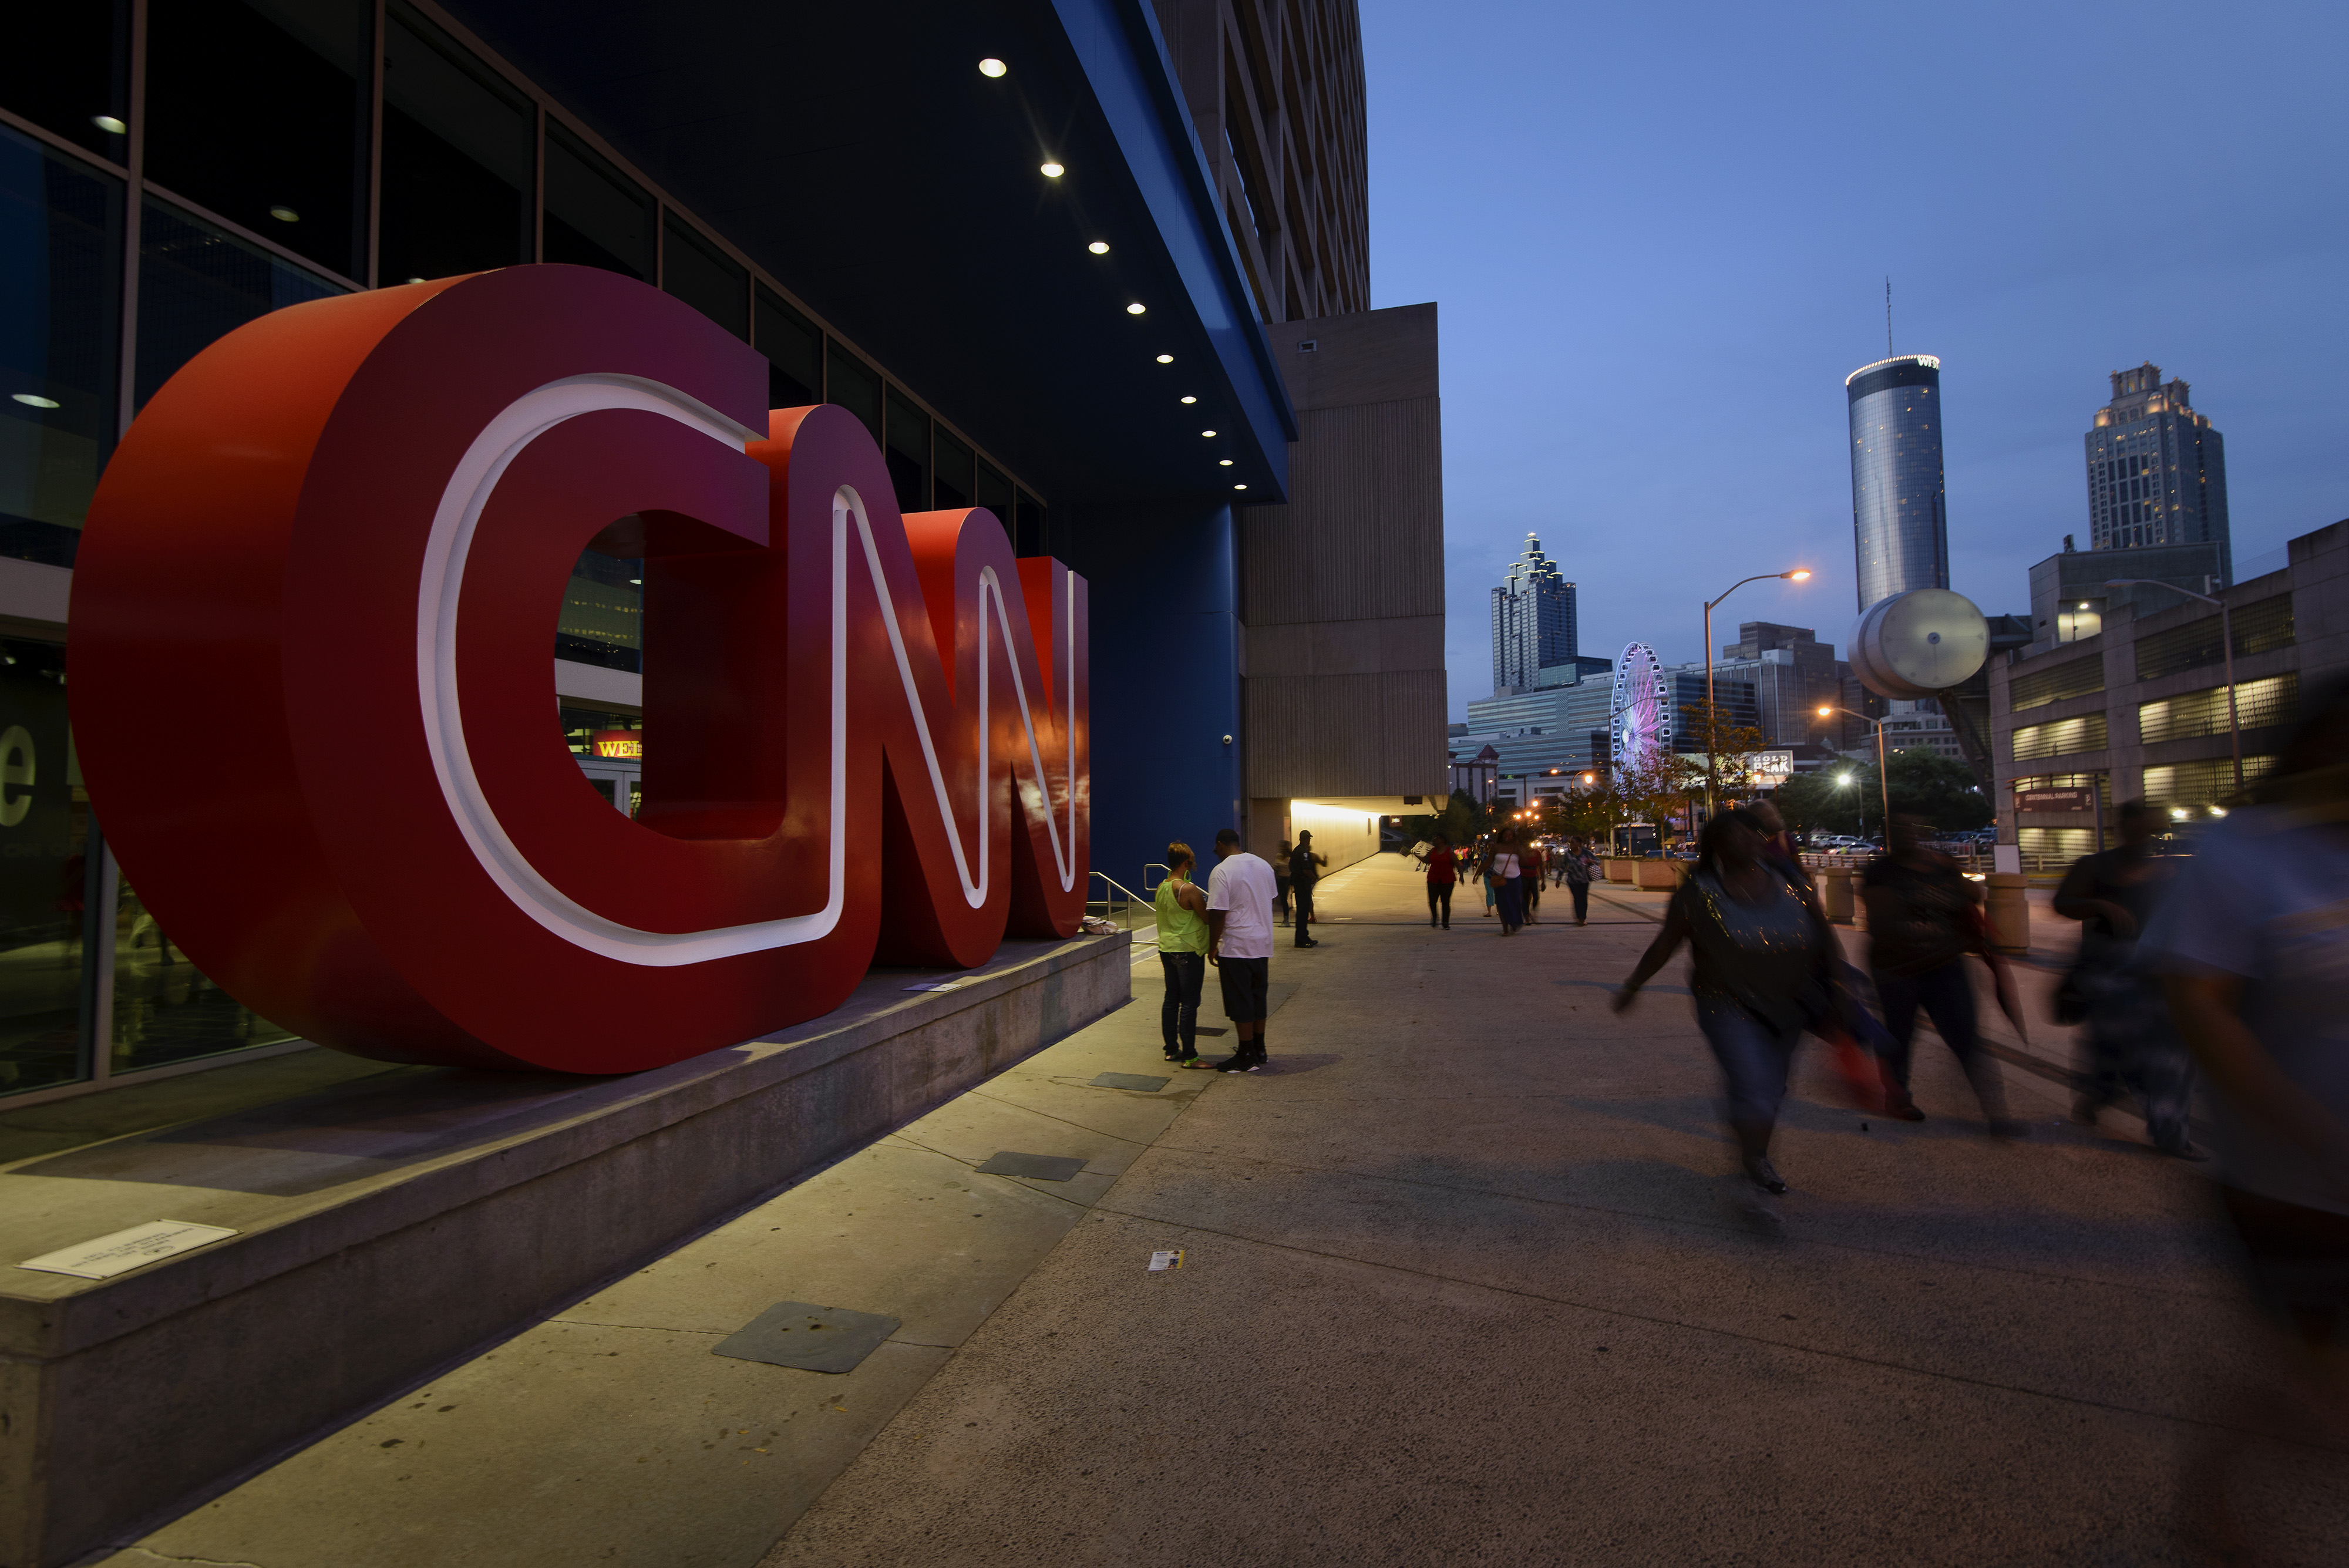 CNN's headquarters building in Atlanta, Georgia, seen on Aug. 2, 2014. (Michael A. Schwarz—Bloomberg/Getty Images)